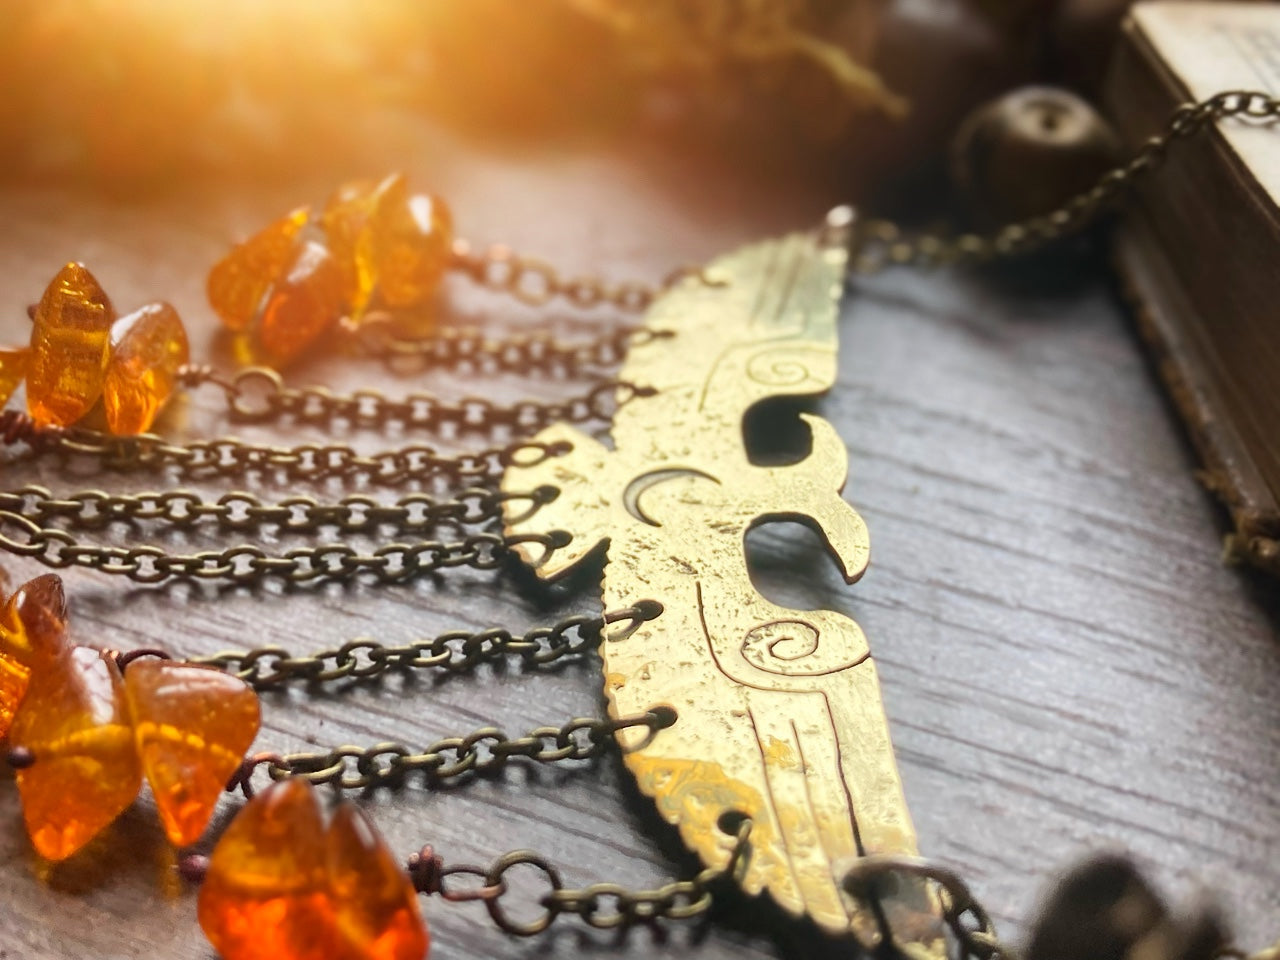 TWO HEADED RAVEN Handmade Brass Necklace with Amber Beads